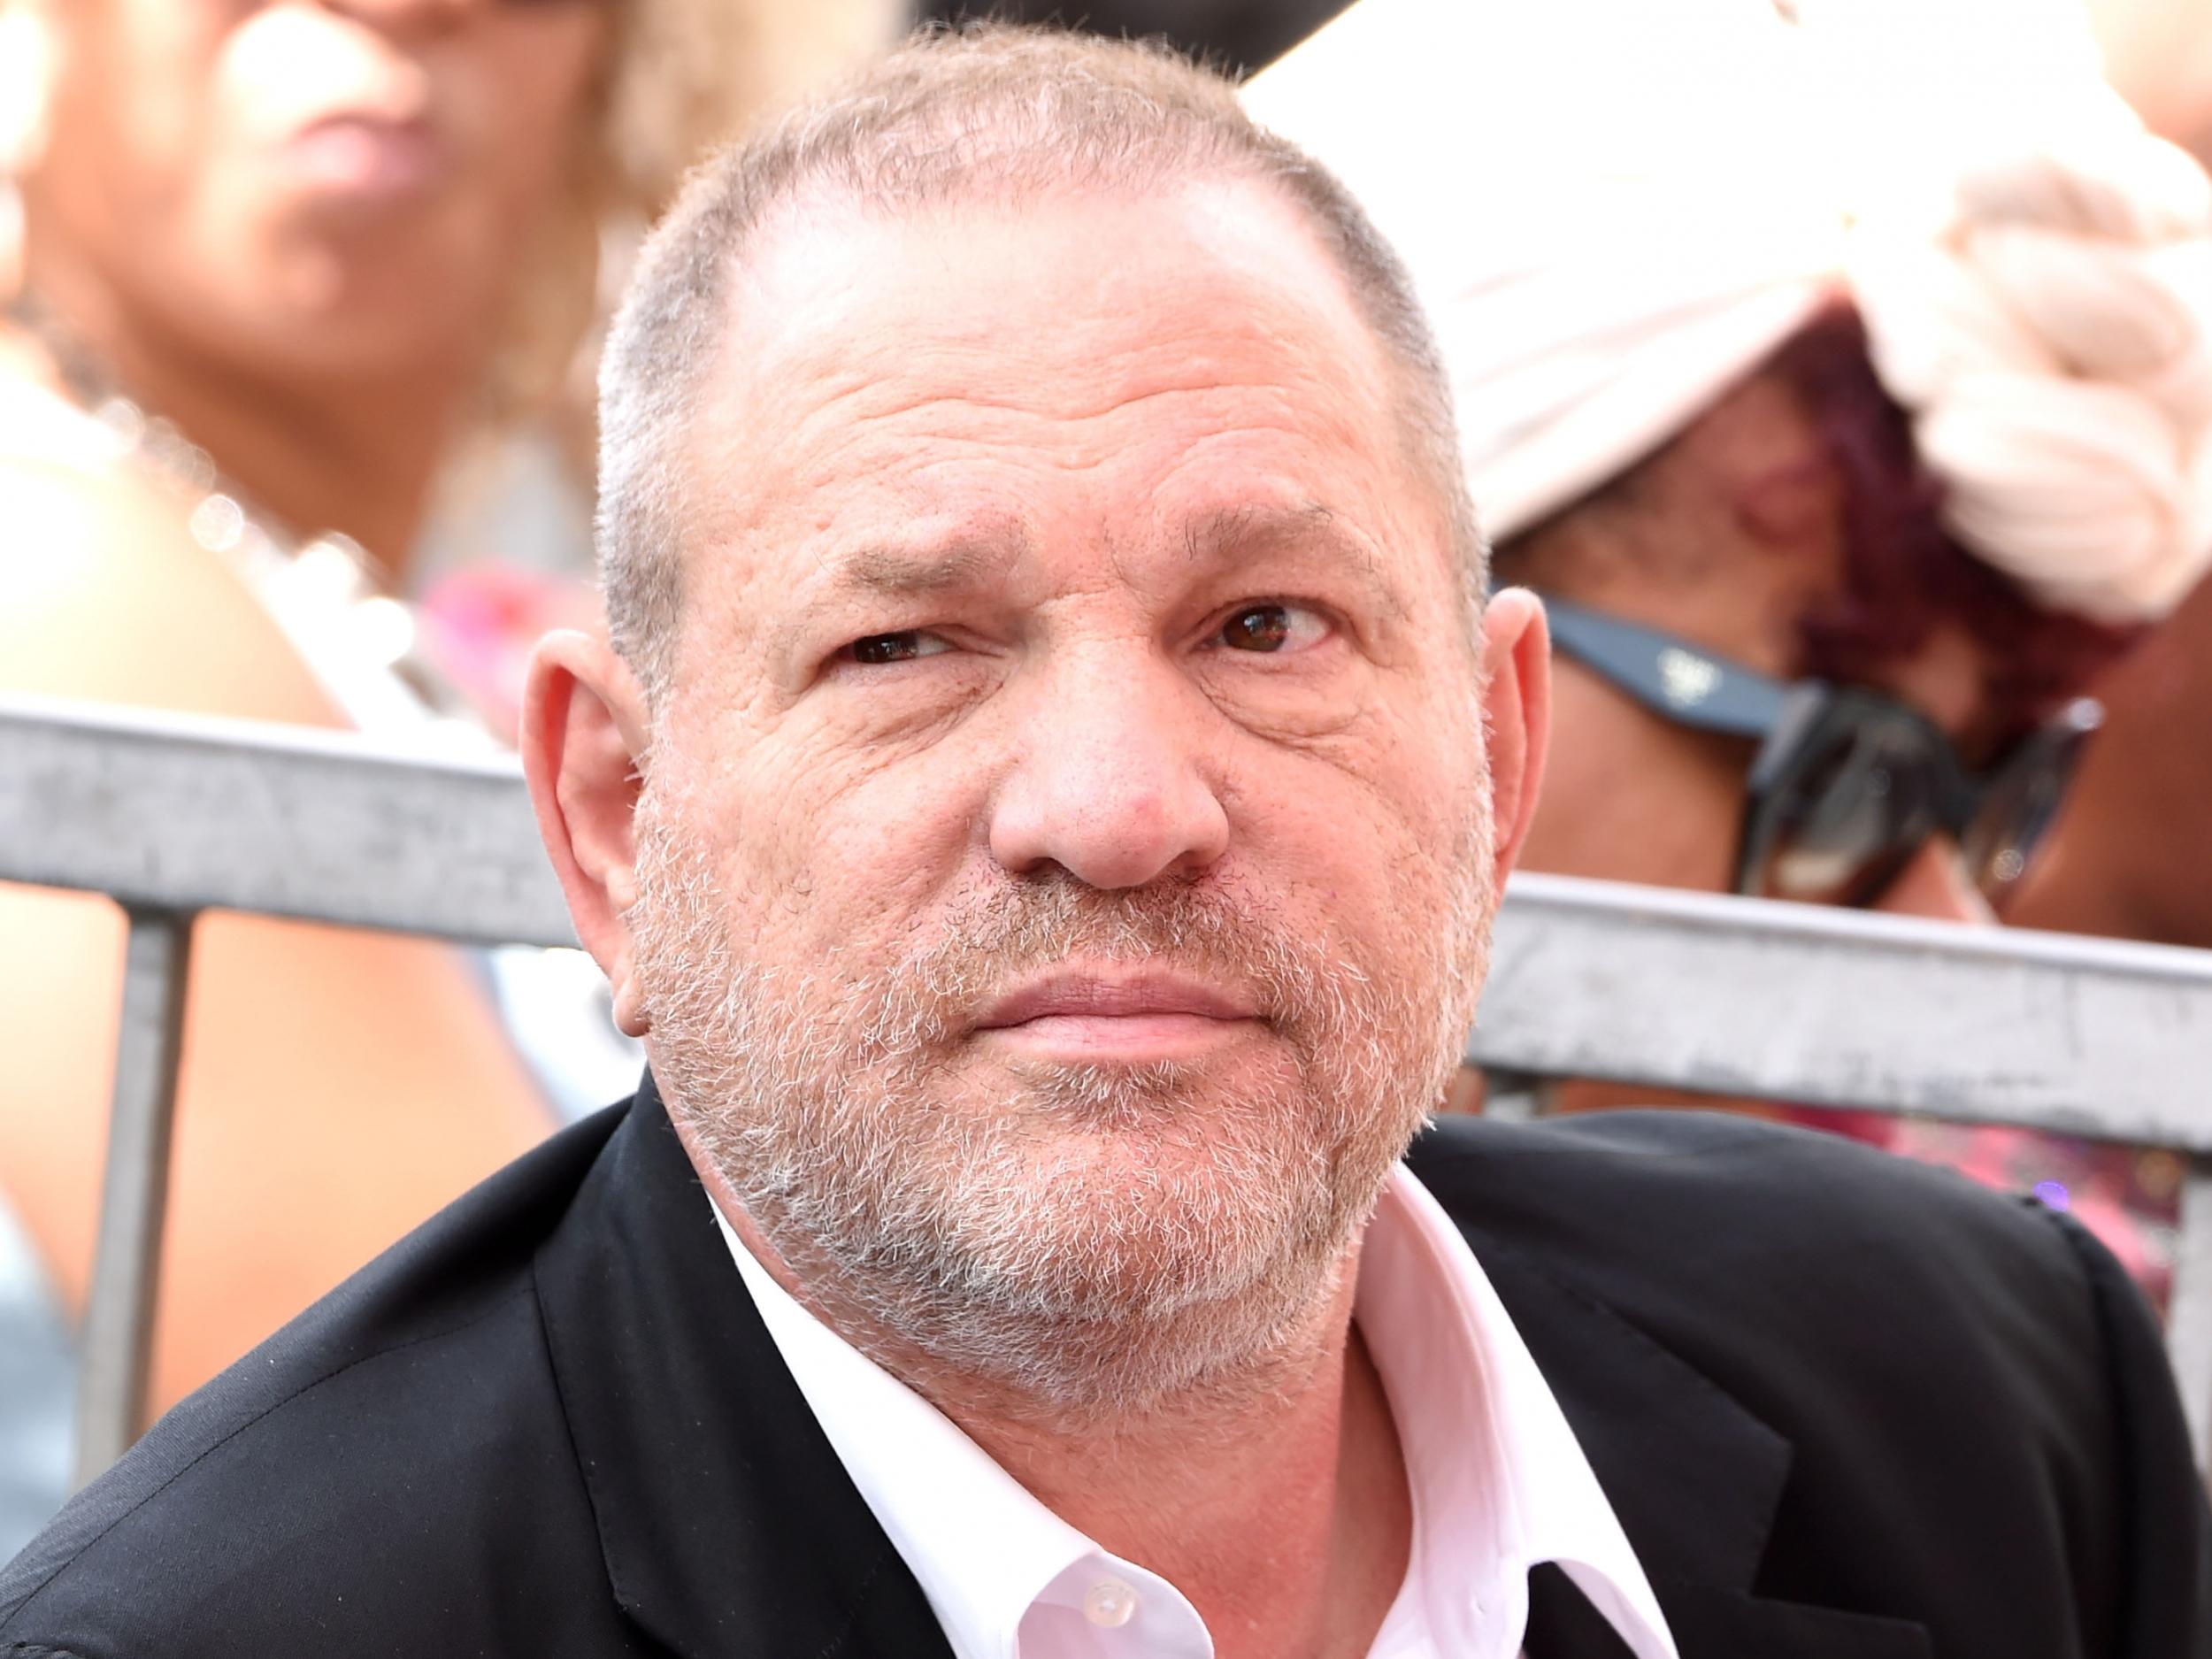 Weinstein also used NDAs in cases that have nothing to do with allegations of harassment or sexual assault